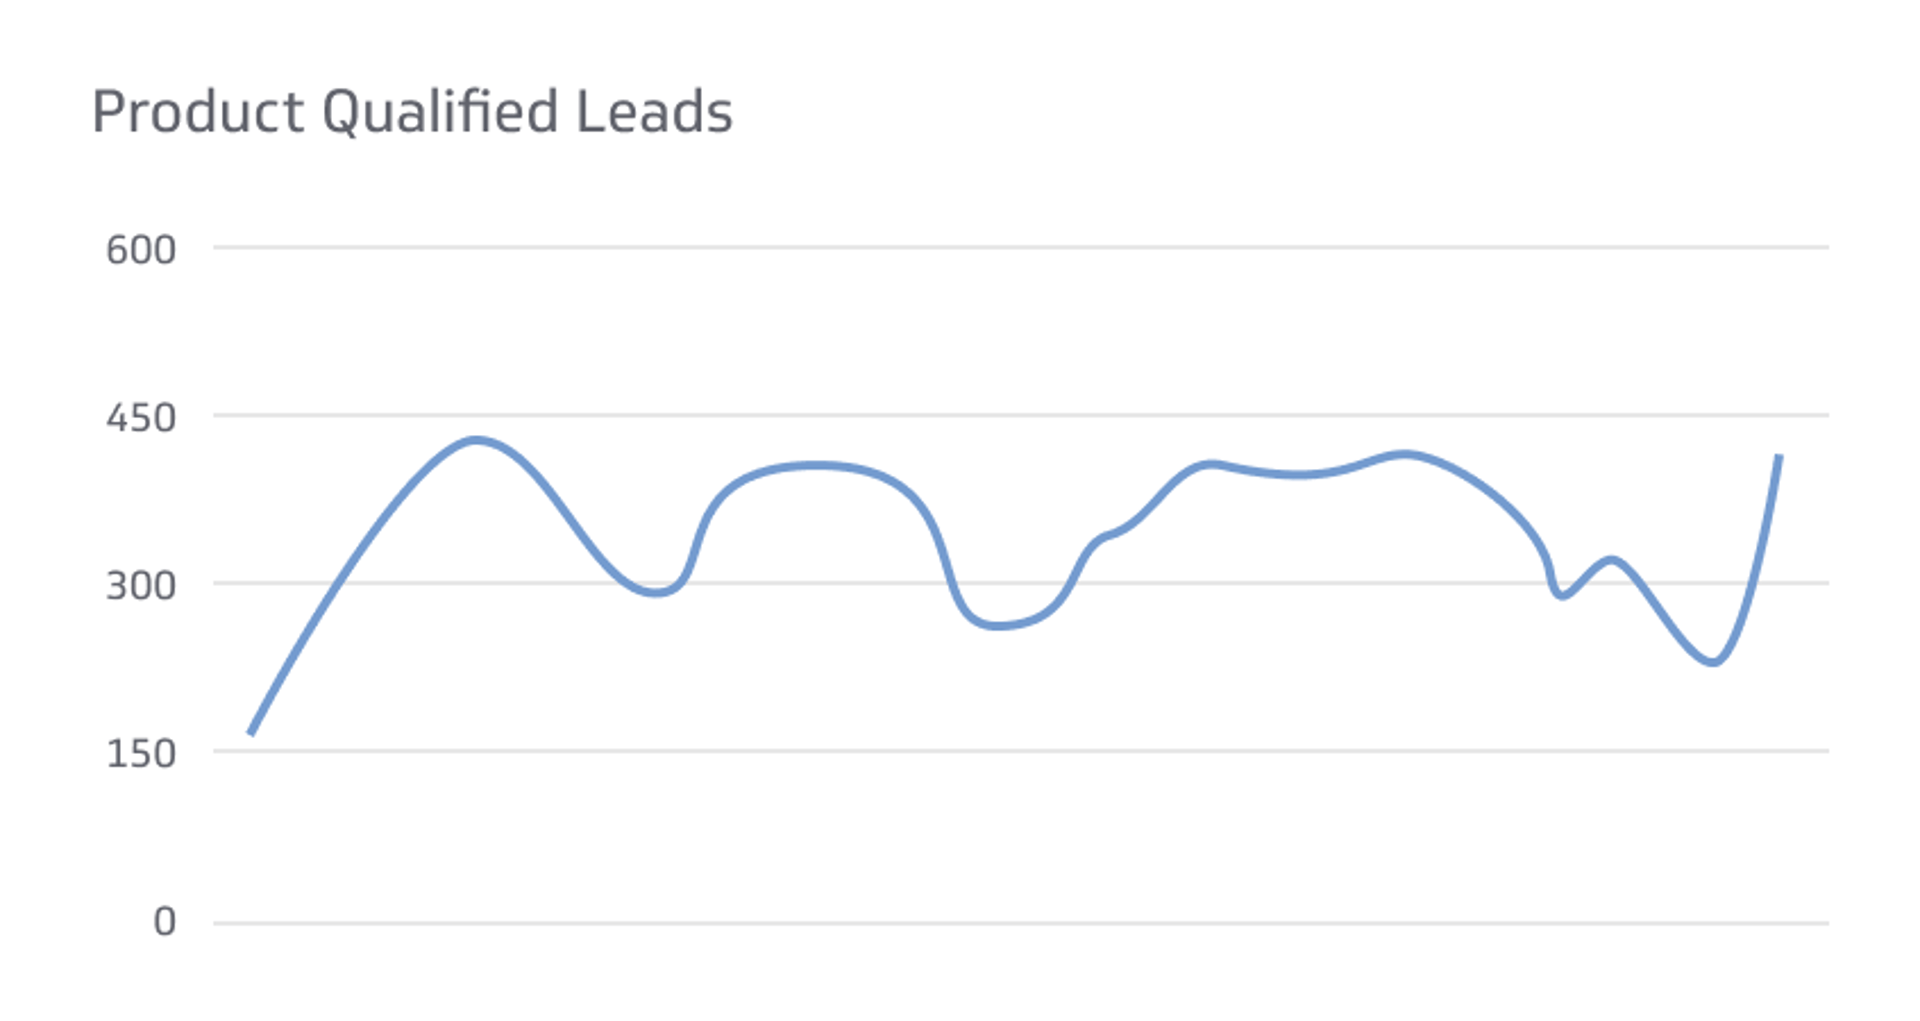 Related KPI Examples - Product Qualified Leads Metric